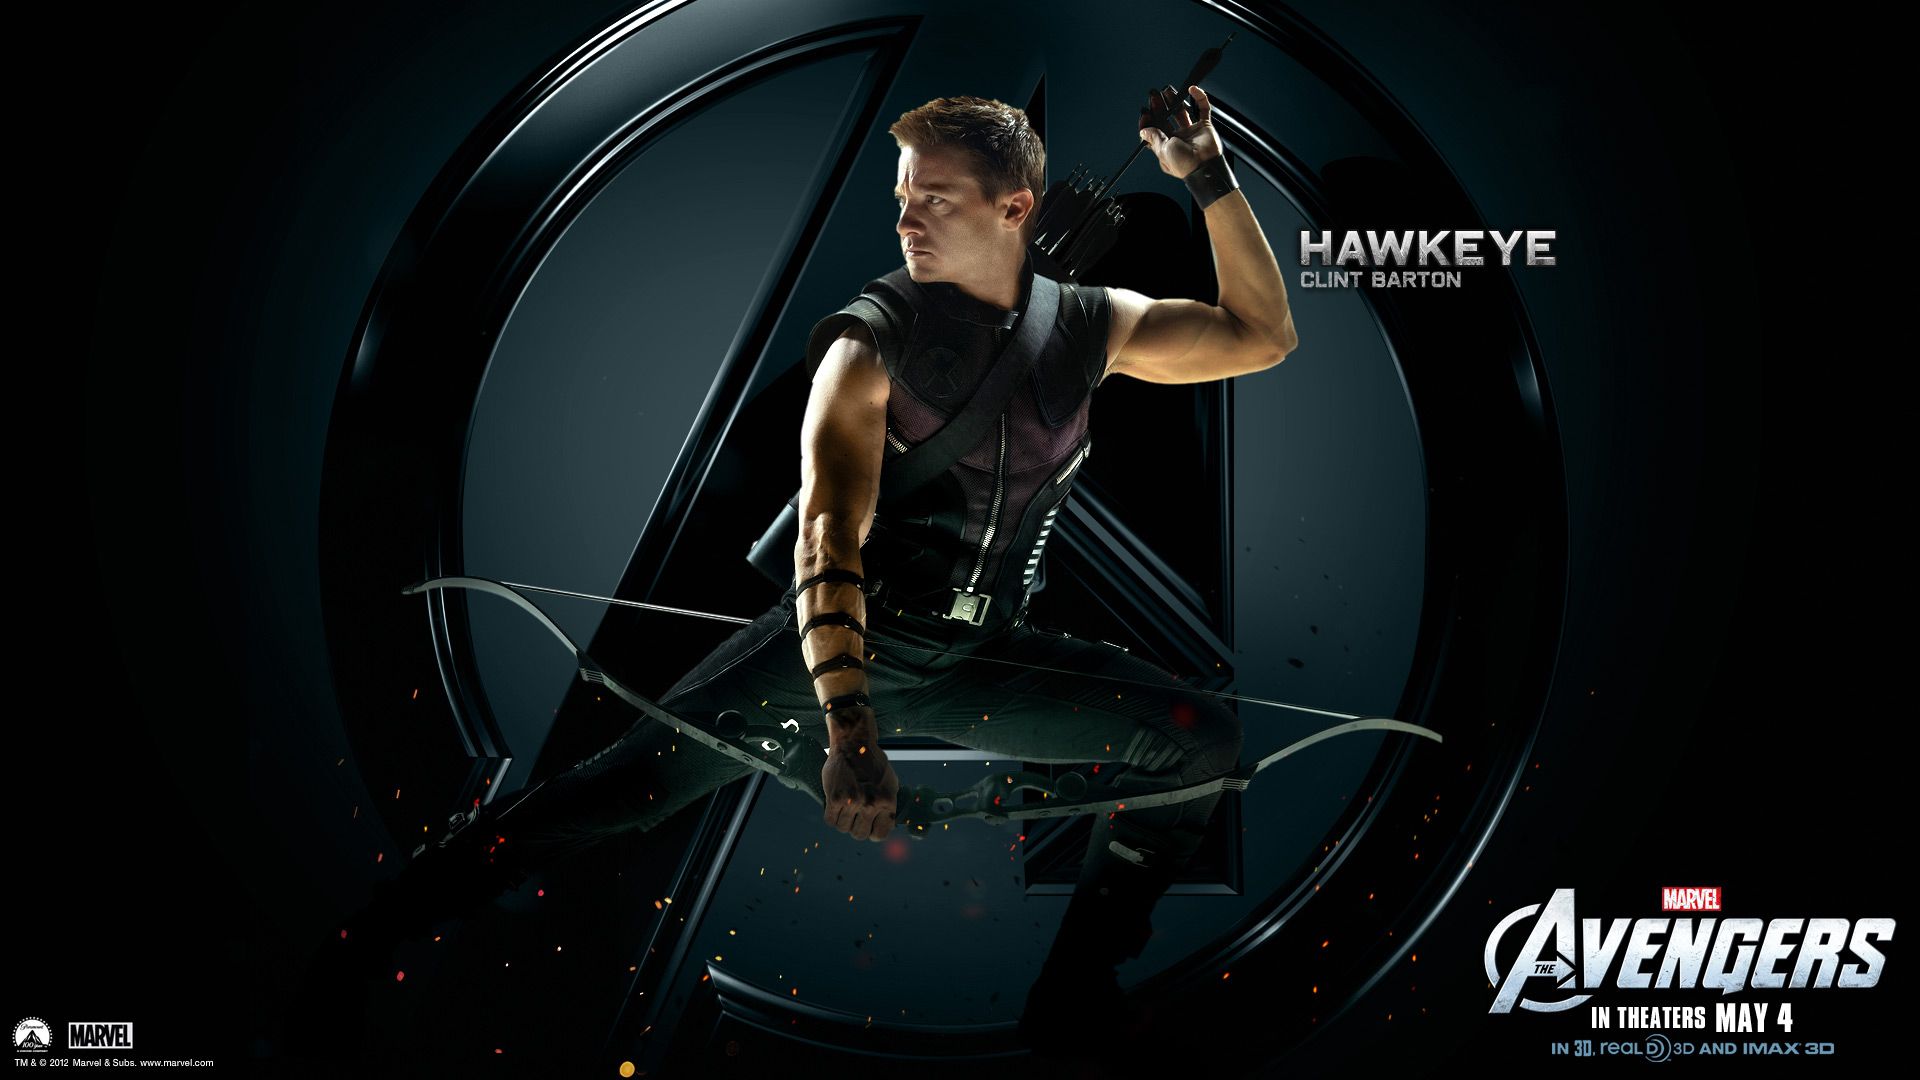 Redirect. Avengers picture, Hawkeye avengers, Avengers movies